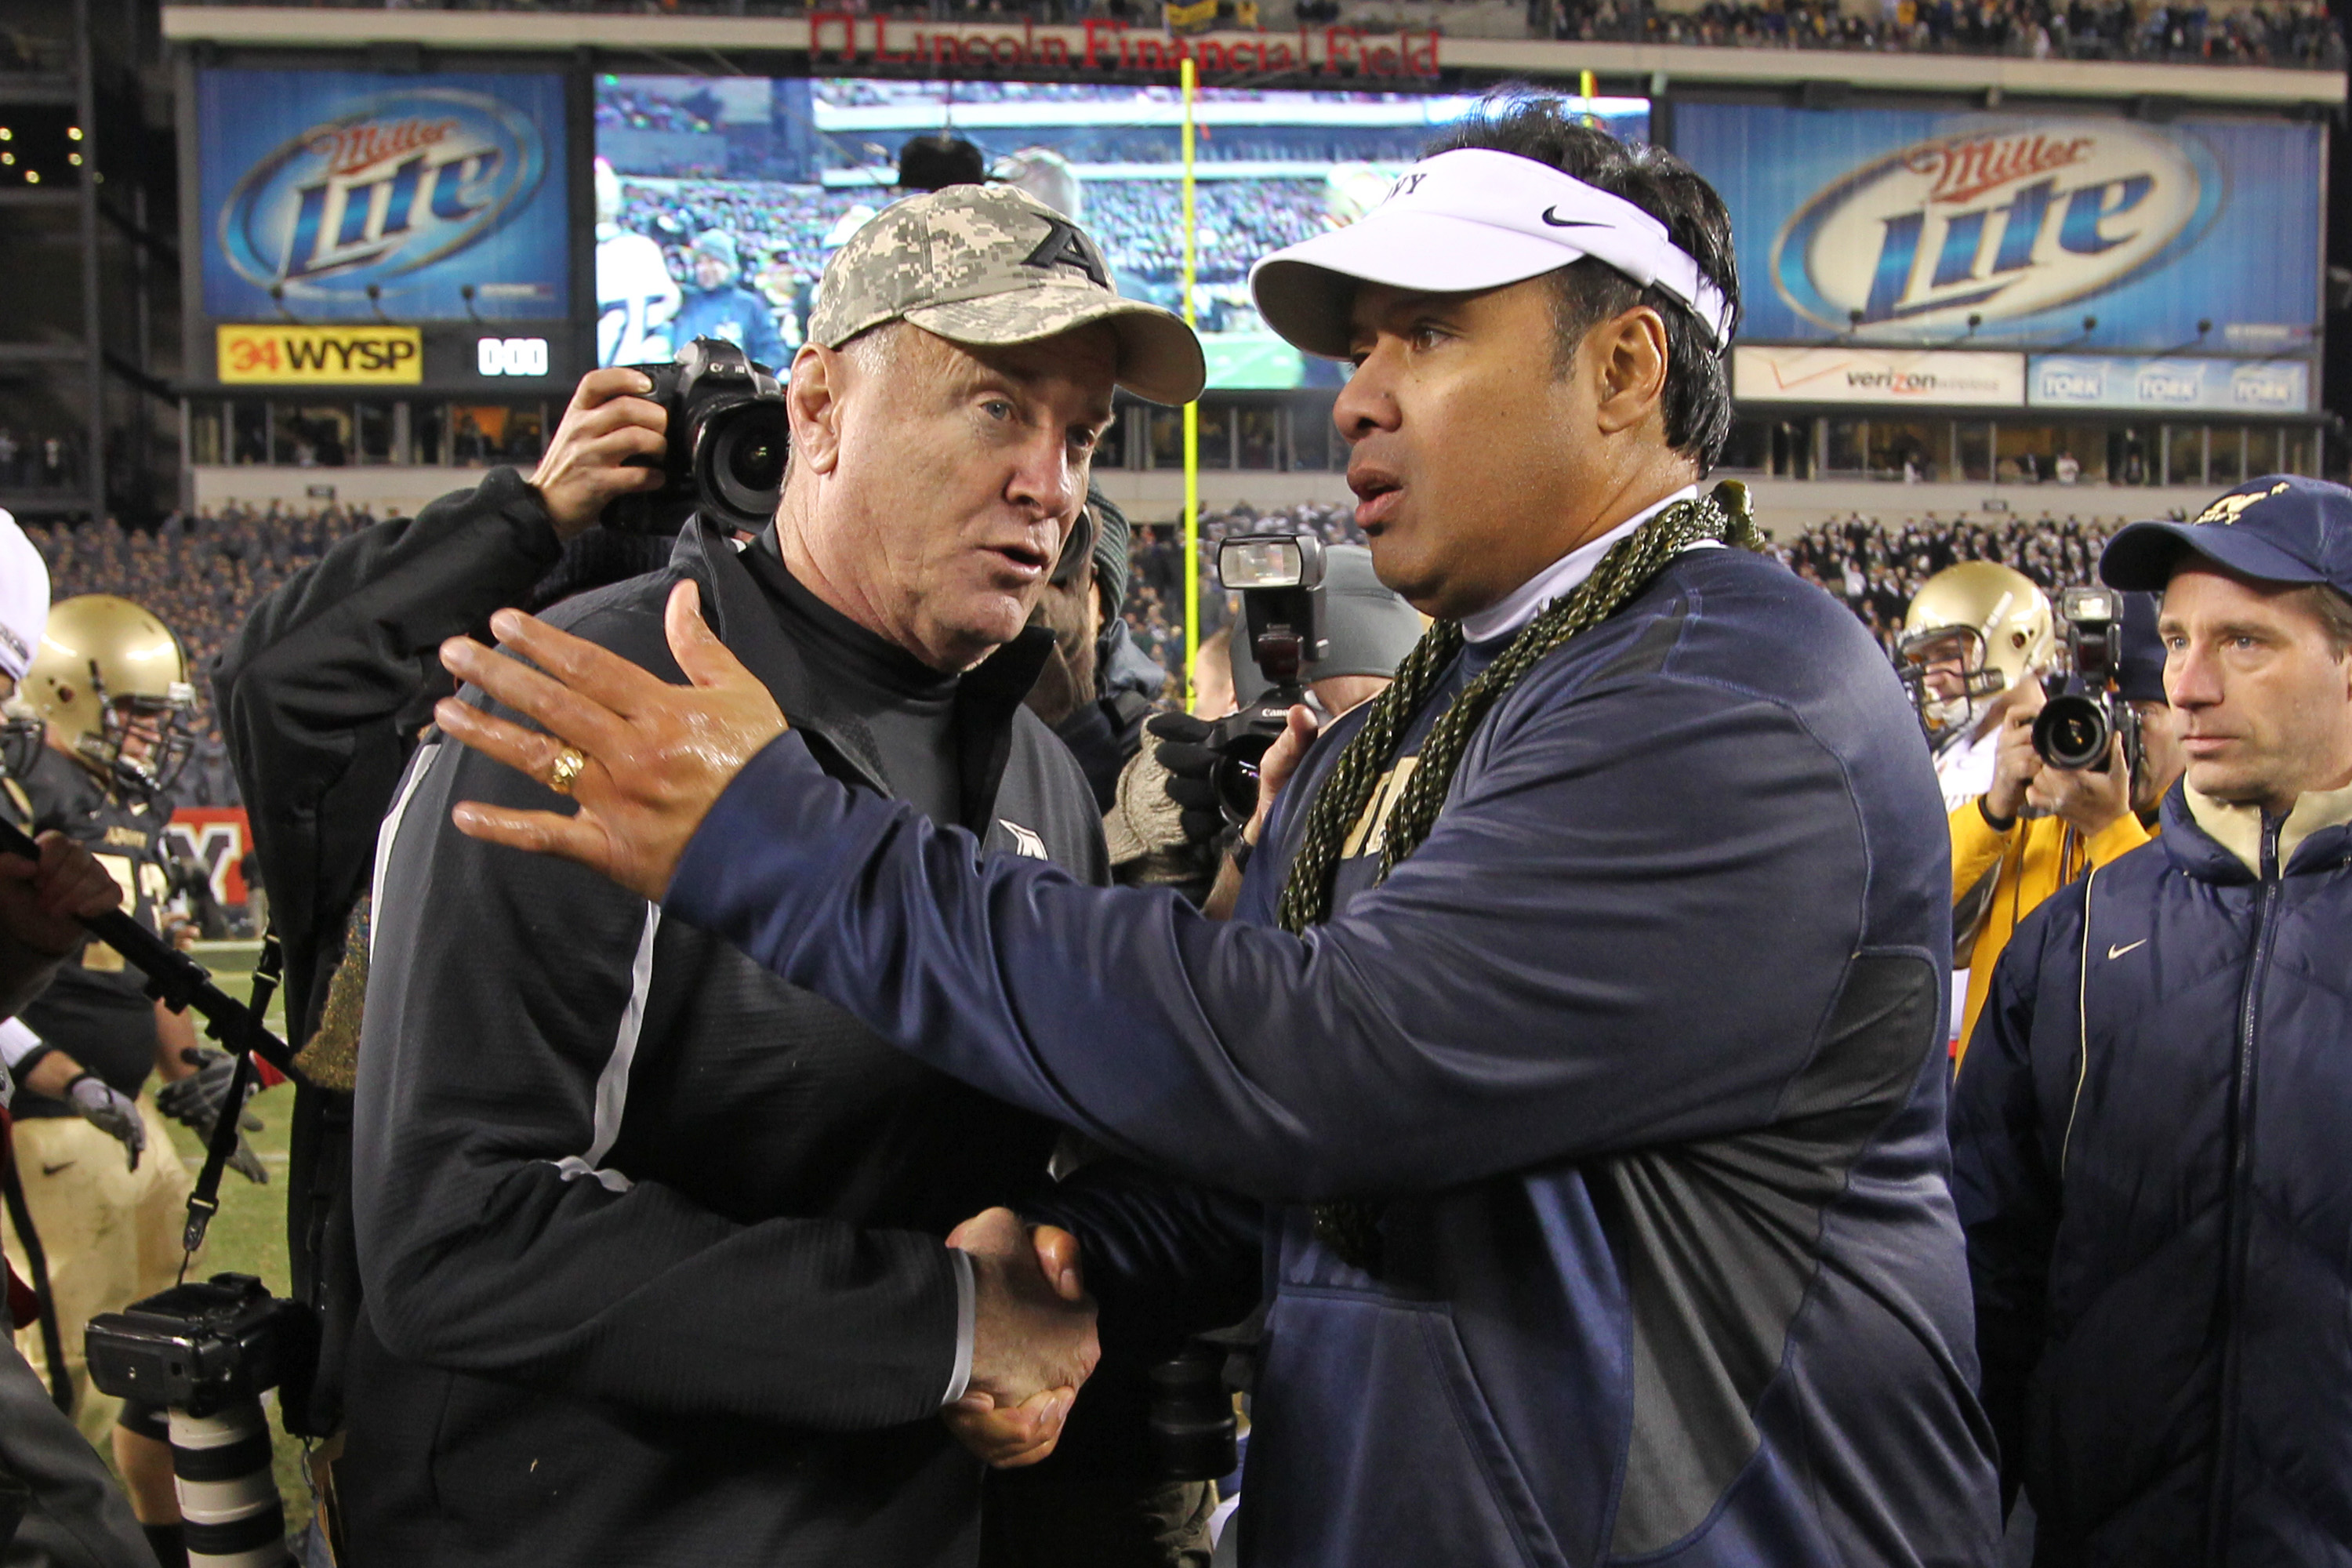 PHILADELPHIA - DECEMBER 11: Head coach Rich Ellerson of the Army Black Knights (L) shakes hands with head coach Ken Niumatalolo of the Navy Midshipmen after a game on December 11, 2010 at Lincoln Financial Field in Philadelphia, Pennsylvania. The Midshipm